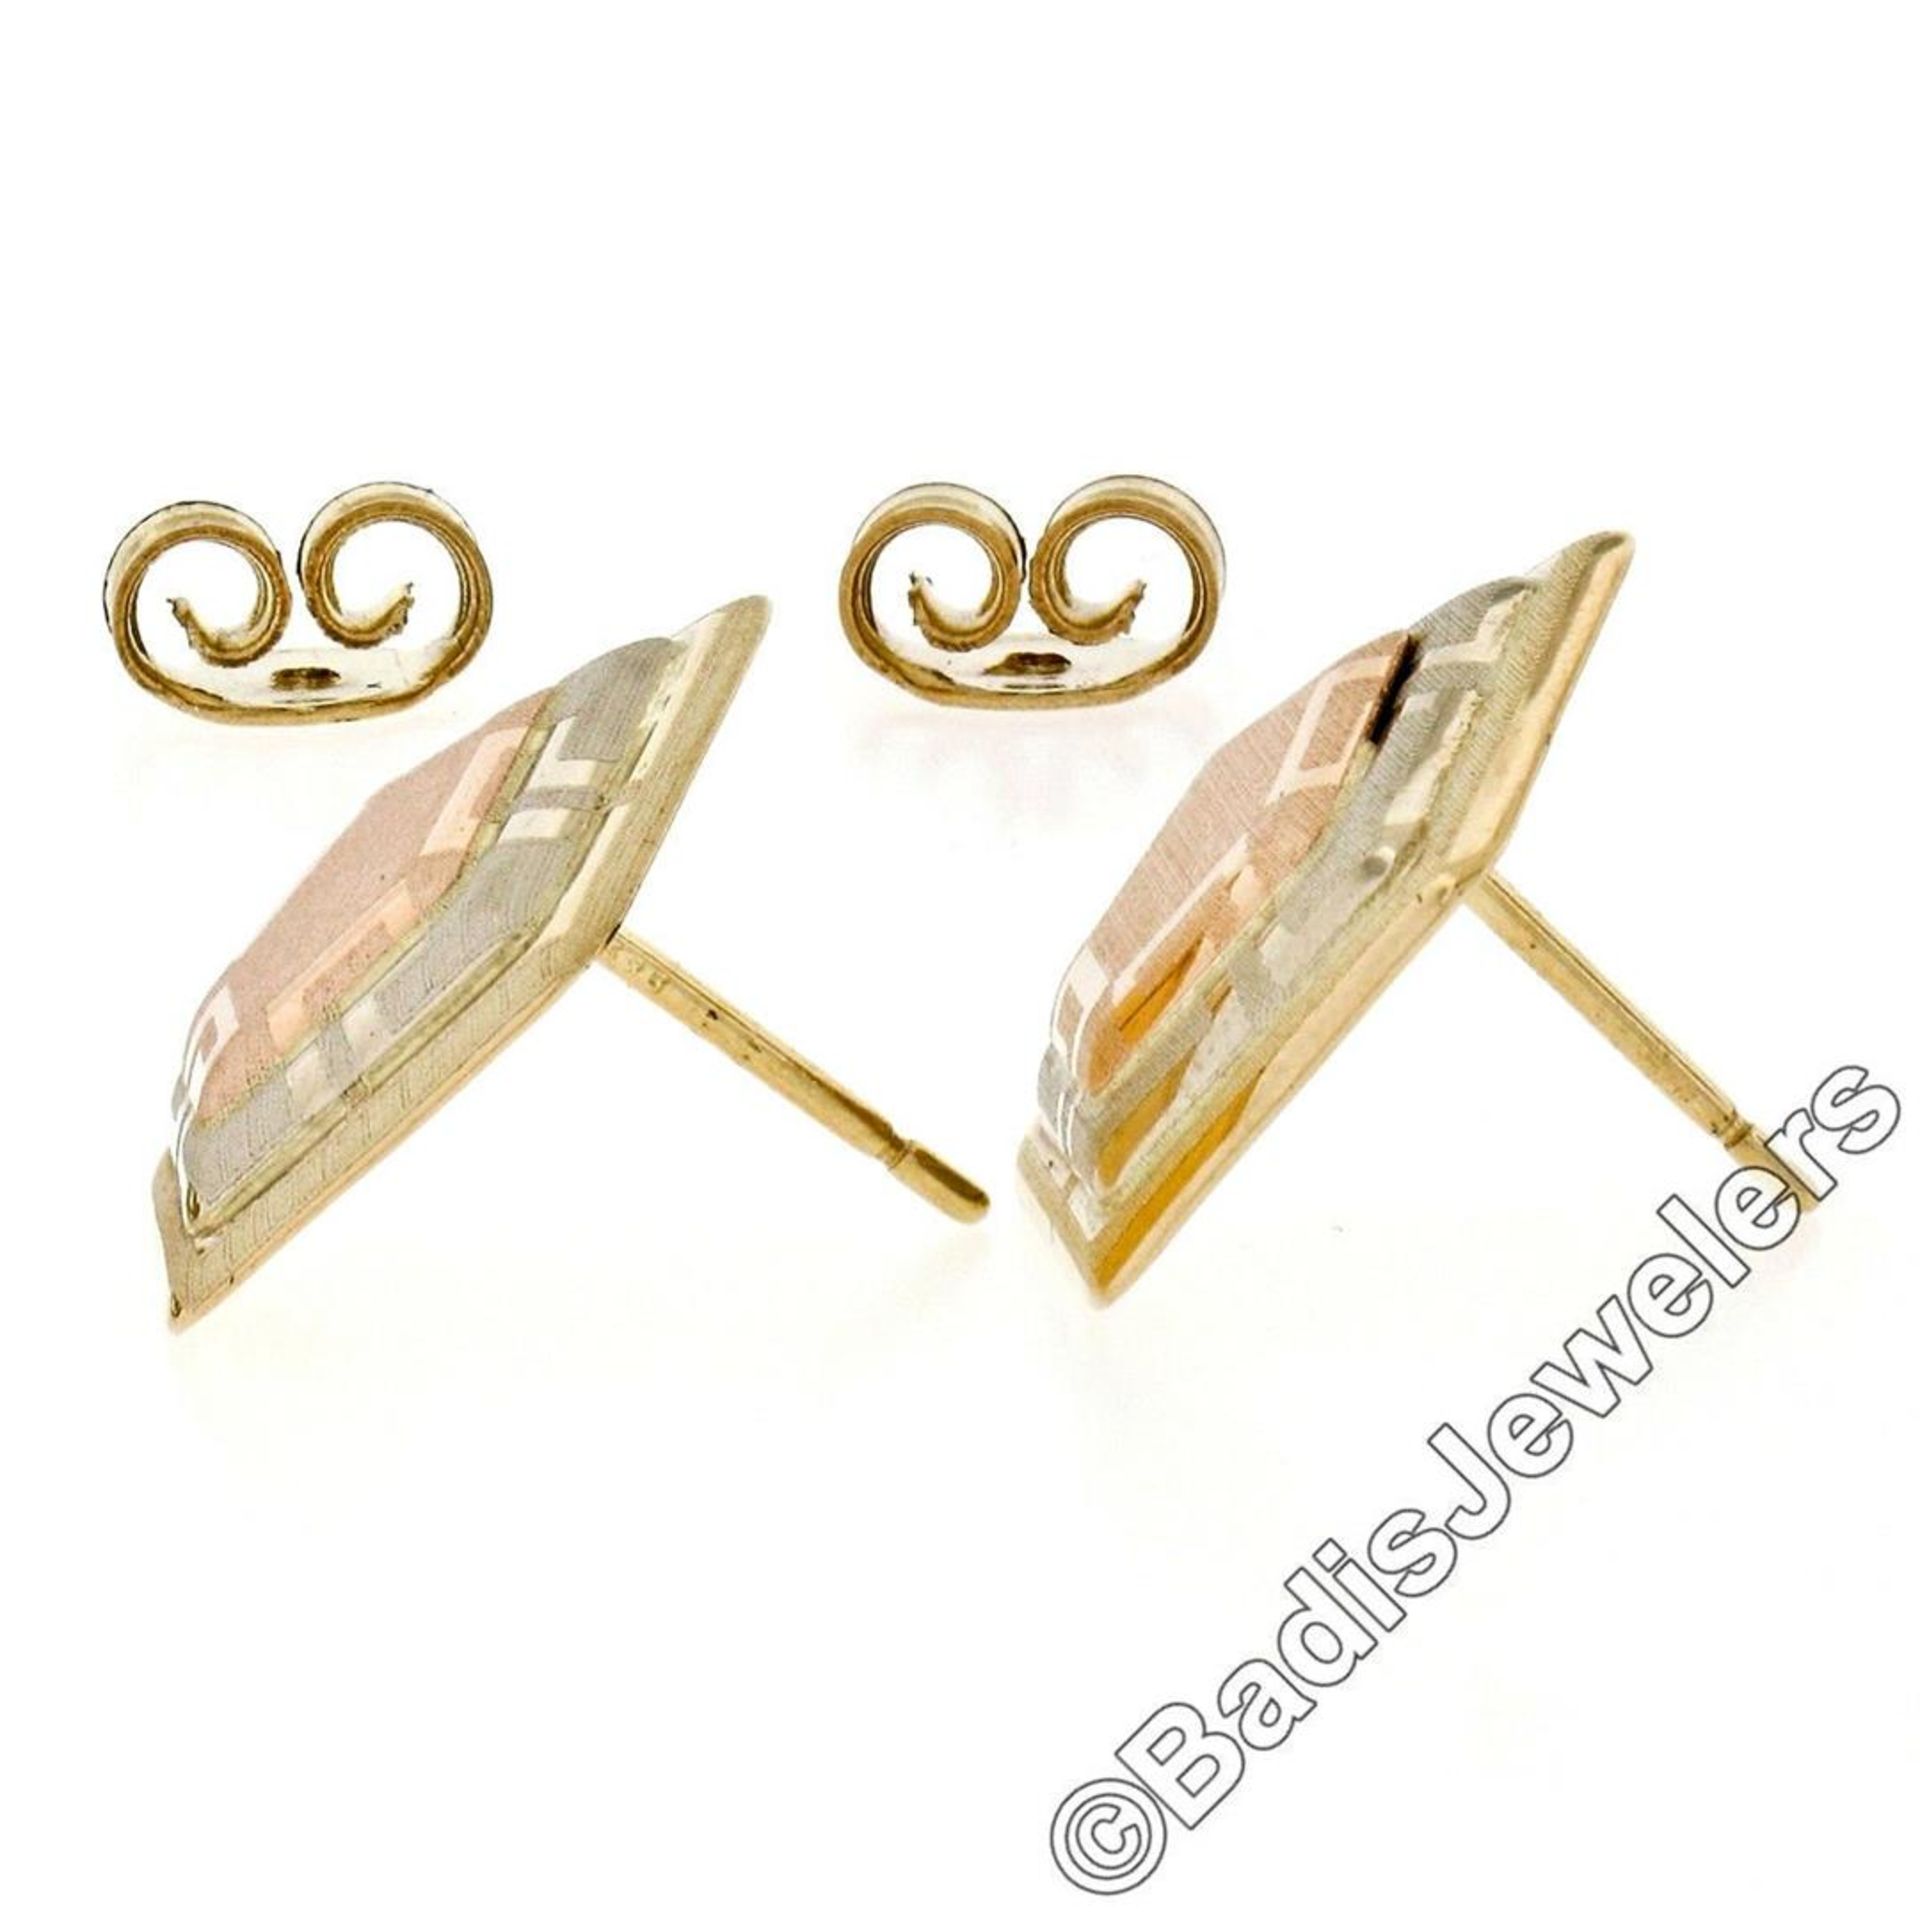 New 14kt Rose, White, and Yellow Gold Stone Finished Tiered Pentagon Stud Earrin - Image 3 of 6